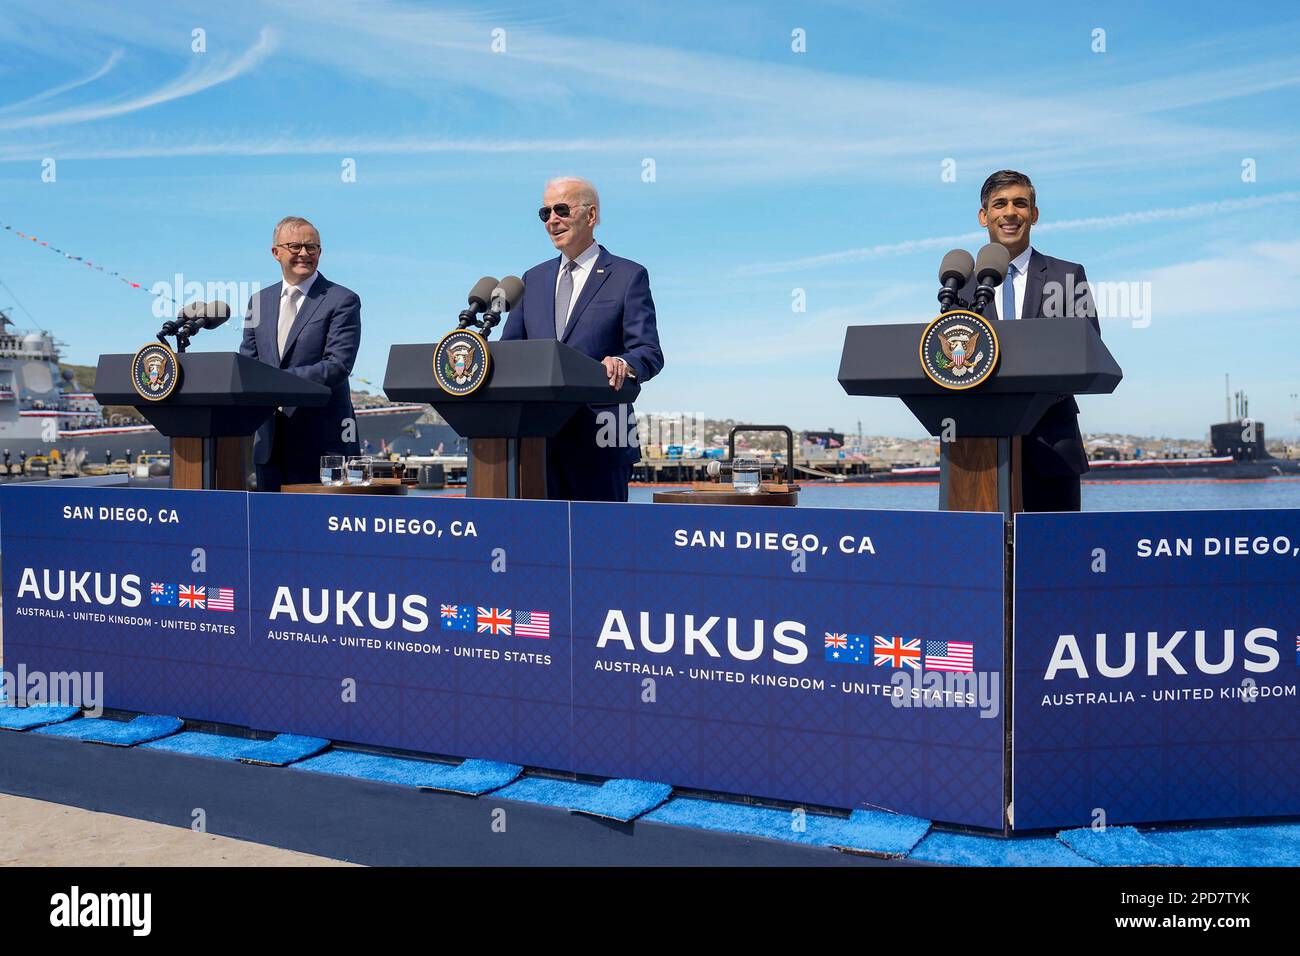 San Diego, United States of America. 13 March, 2023. U.S President Joe Biden, center, responds to a question during a press conference with Australian Prime Minister Anthony Albanese, left, and British Prime Minister Rishi Sunak following at Point Loma naval base, March 13, 2023 in San Diego, California. The three leaders of the AUKUS security pact agreed on expanding their nuclear-powered submarine fleet. Credit: Adam Schultz/White House Photo/Alamy Live News Stock Photo